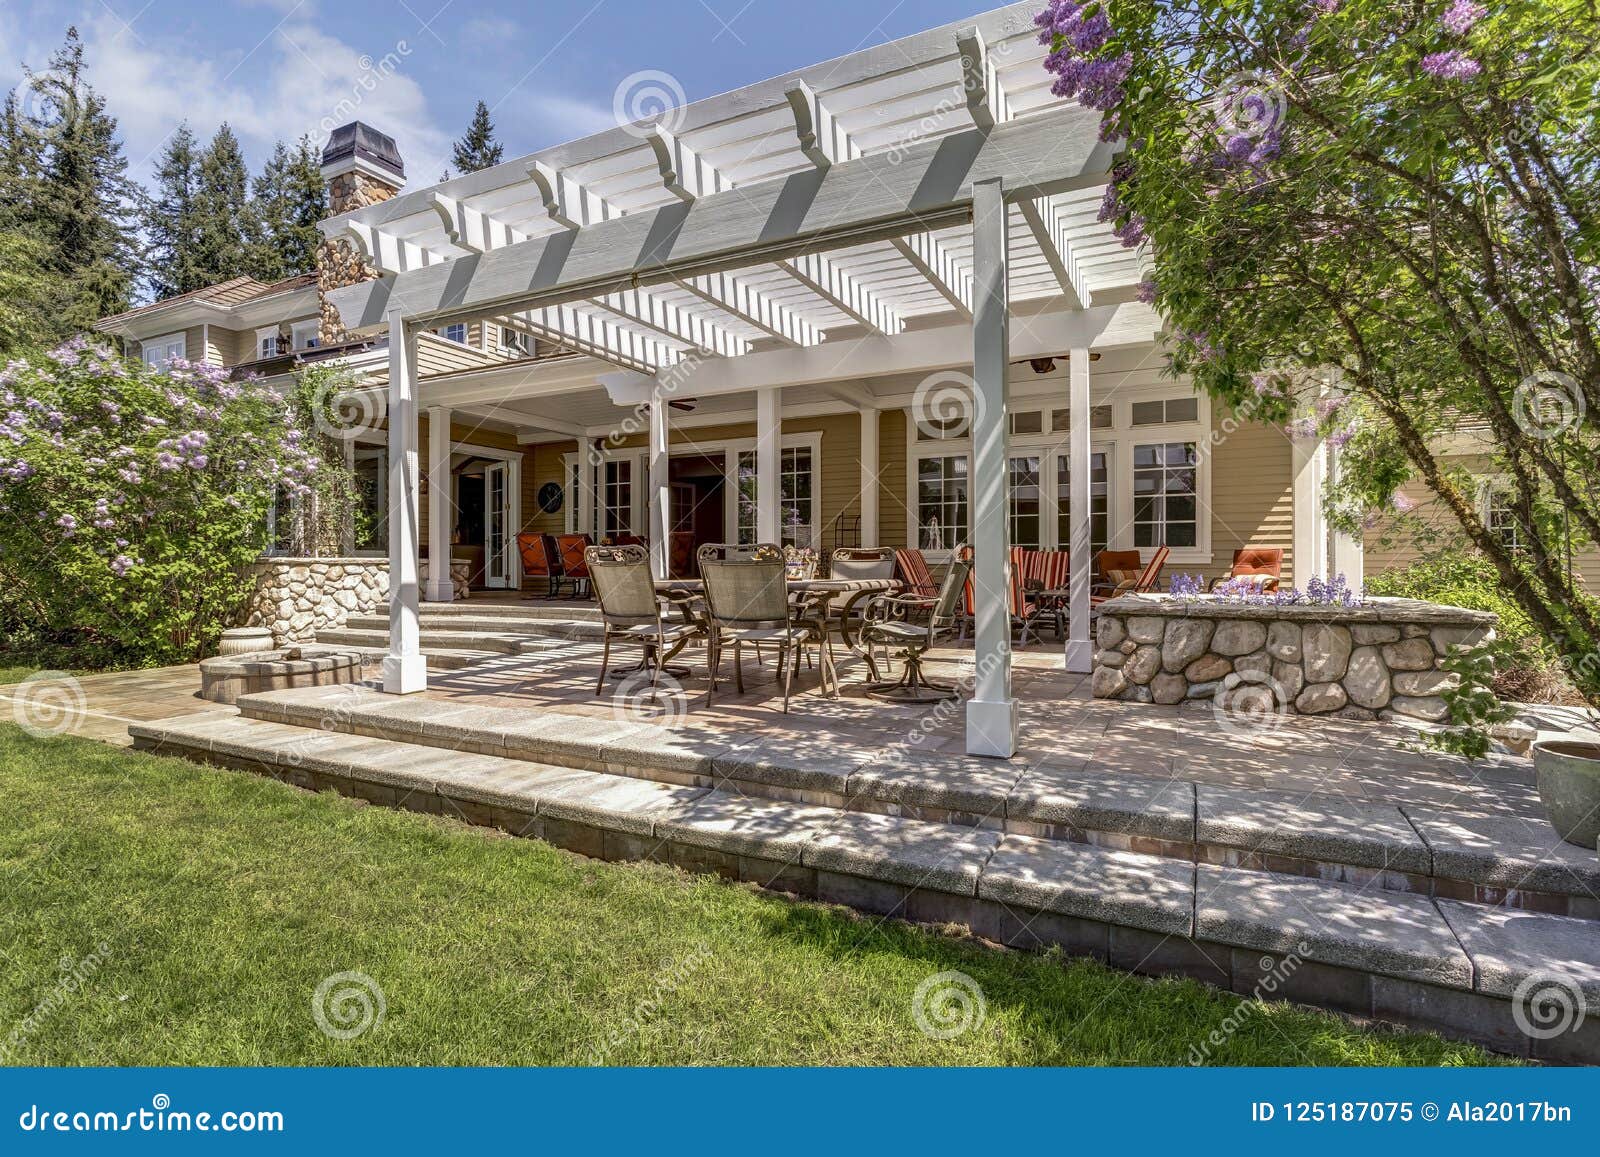 lovely outdoor deck patio space with white dining pergola.